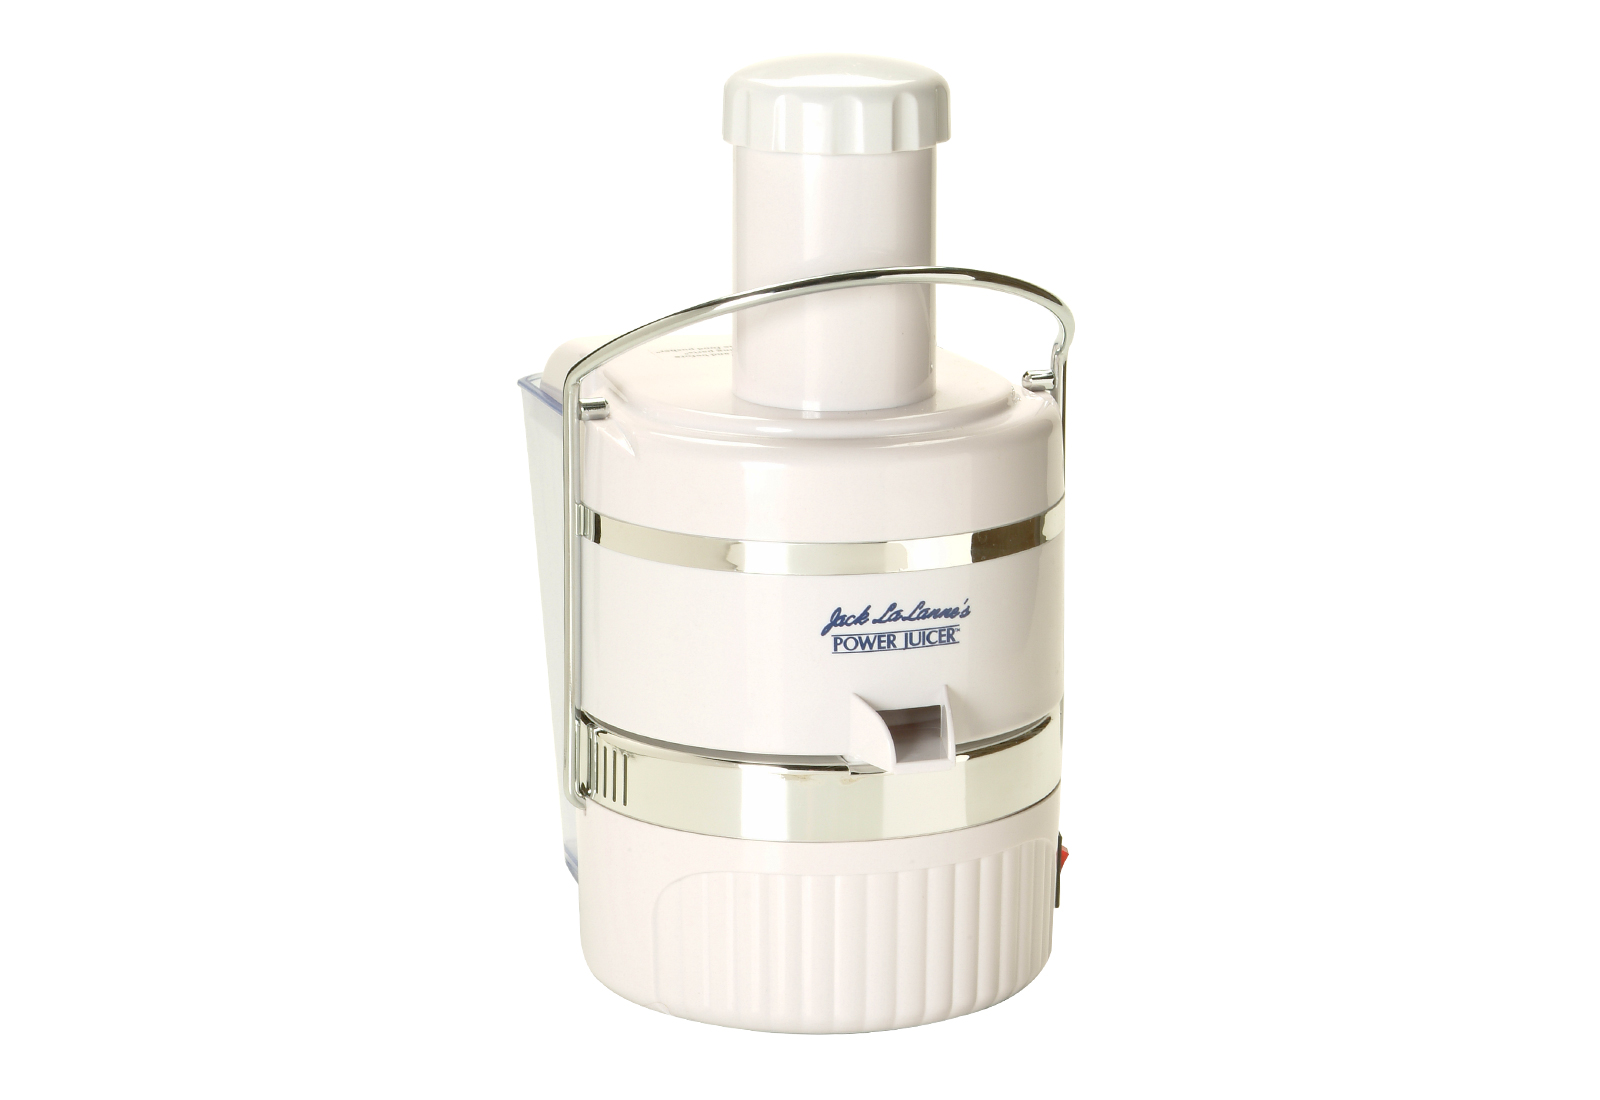 Power Juicer Product Image